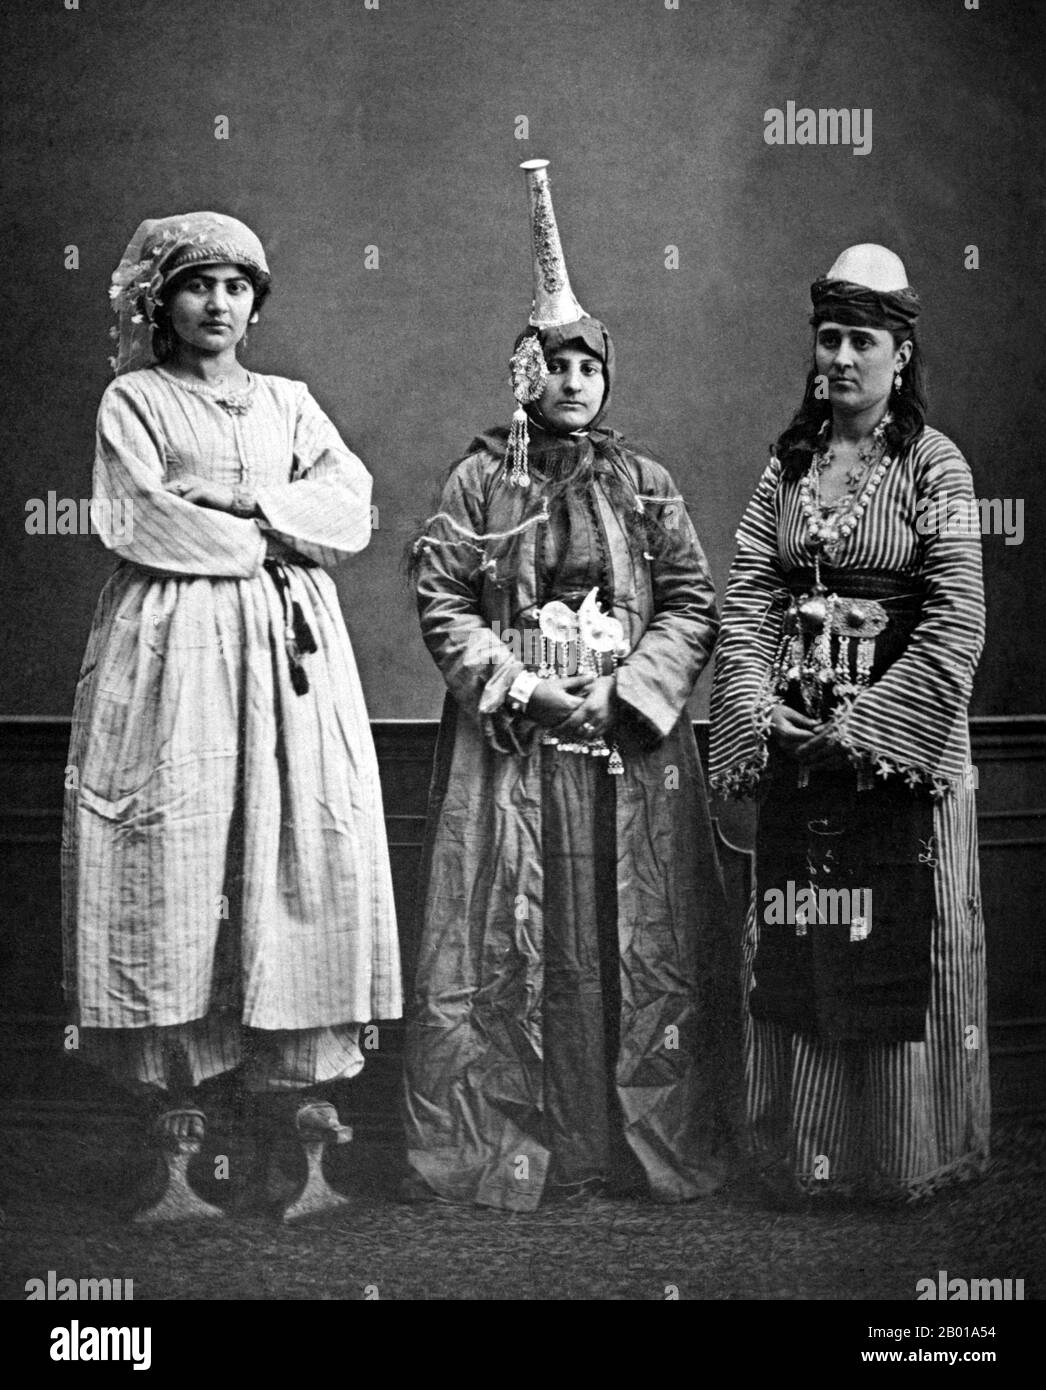 Syria: Three Syrian women, left to right - urban Arab, Druze, rural Arab. The druze woman is wearing a tantour headdress. Photo by Pascal Sebah (1823 - 25 June 1886), Damascus, 1873.  The Druze (Arabic: derzī or durzī‎, plural durūz, Hebrew:‎ druzim) are an esoteric, monotheistic religious community found primarily in Syria, Lebanon, Israel, and Jordan, which emerged during the 11th century from Ismailism, that incorporated several elements of Gnosticism, Neoplatonism and other philosophies. The Druze call themselves Ahl al-Tawhid (People of Unitarianism or Monotheism) or al-Muwaḥḥidūn. Stock Photo